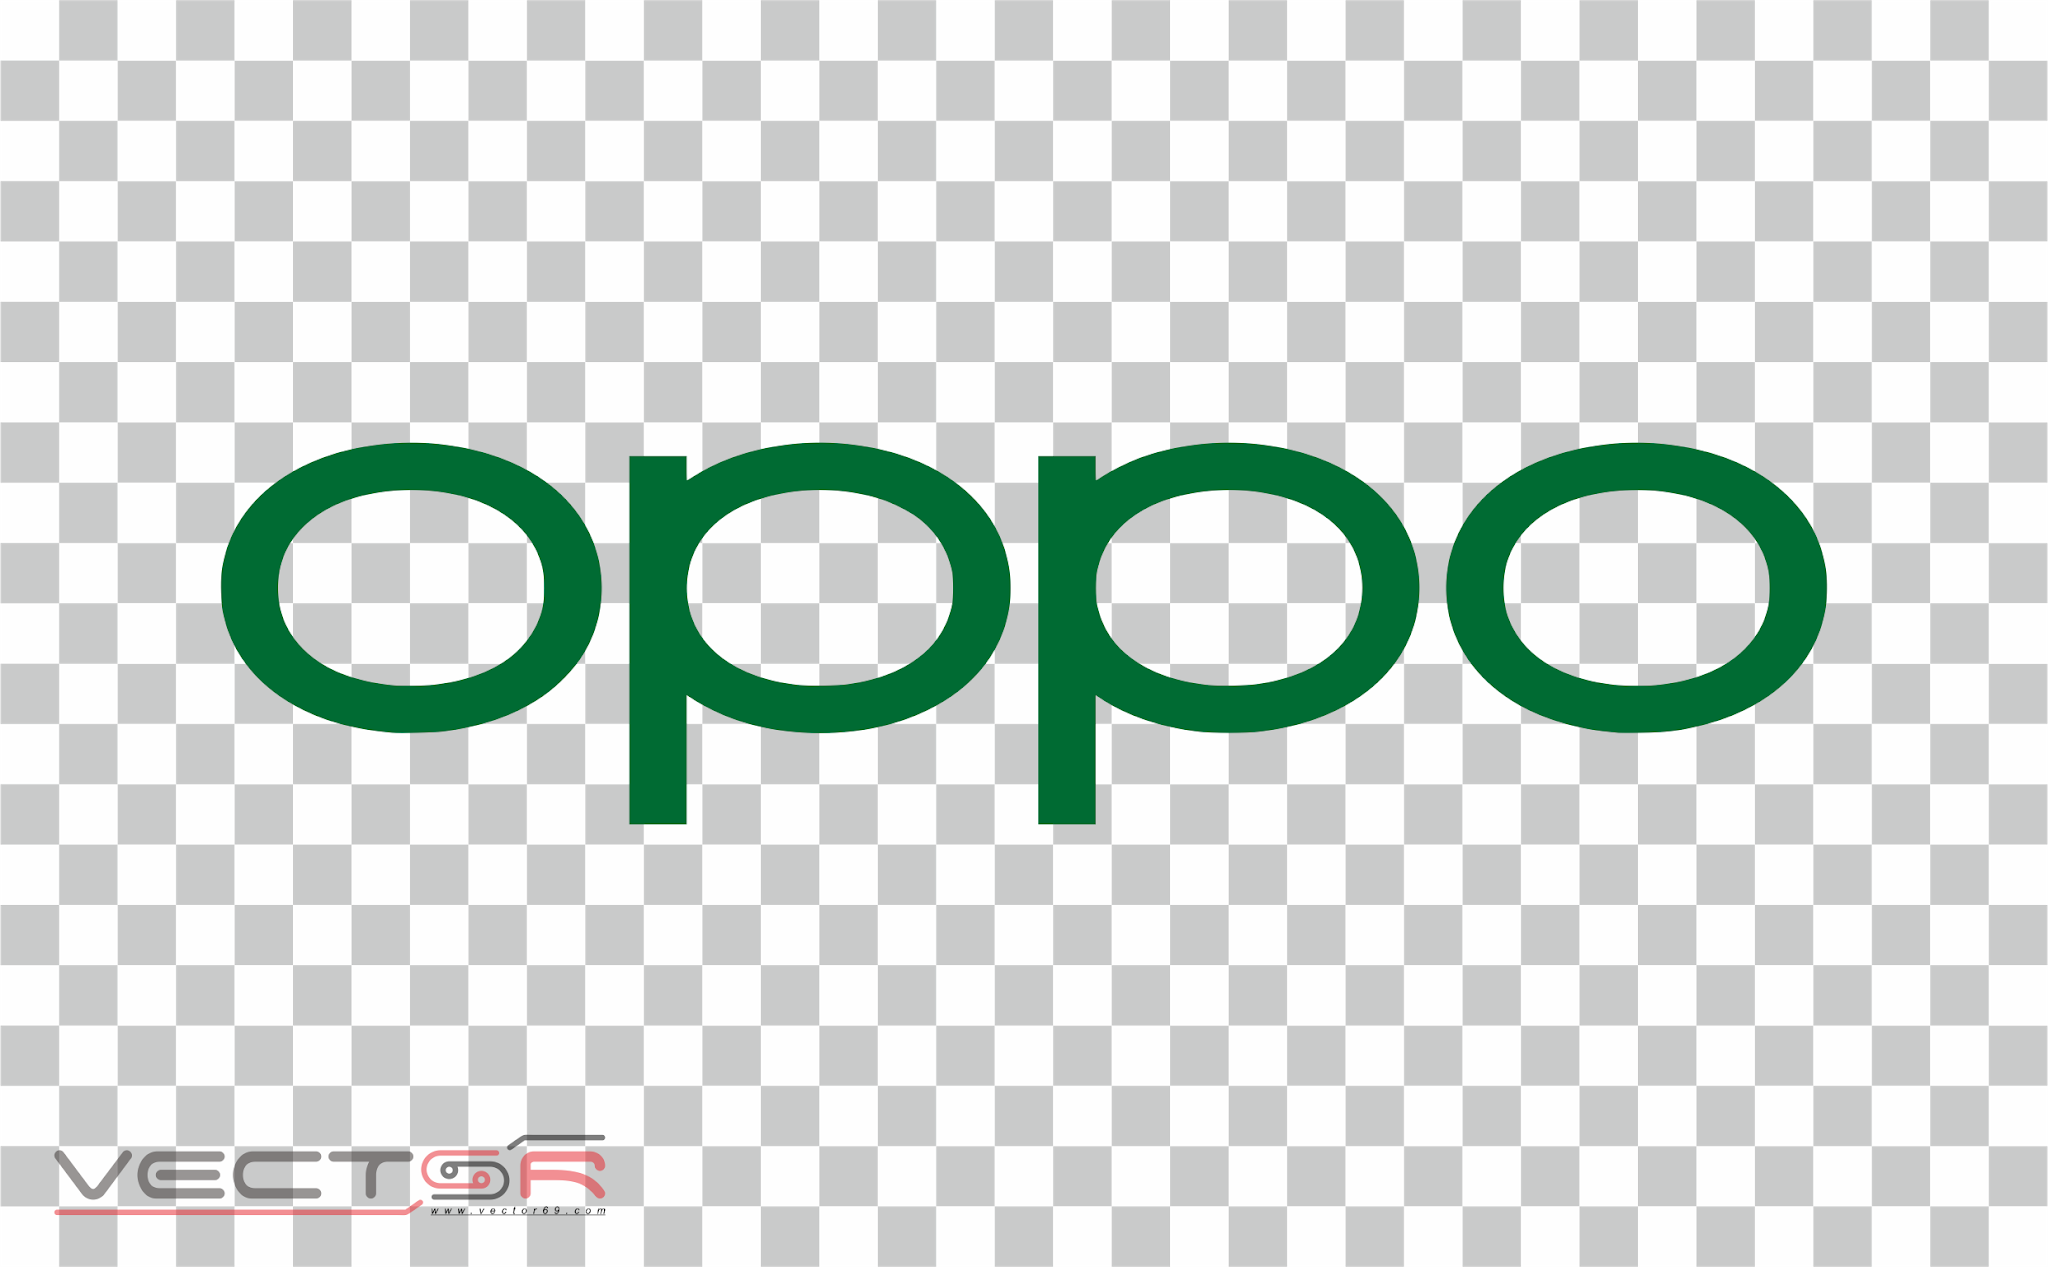 Oppo Logo - Download Vector File PNG (Portable Network Graphics)